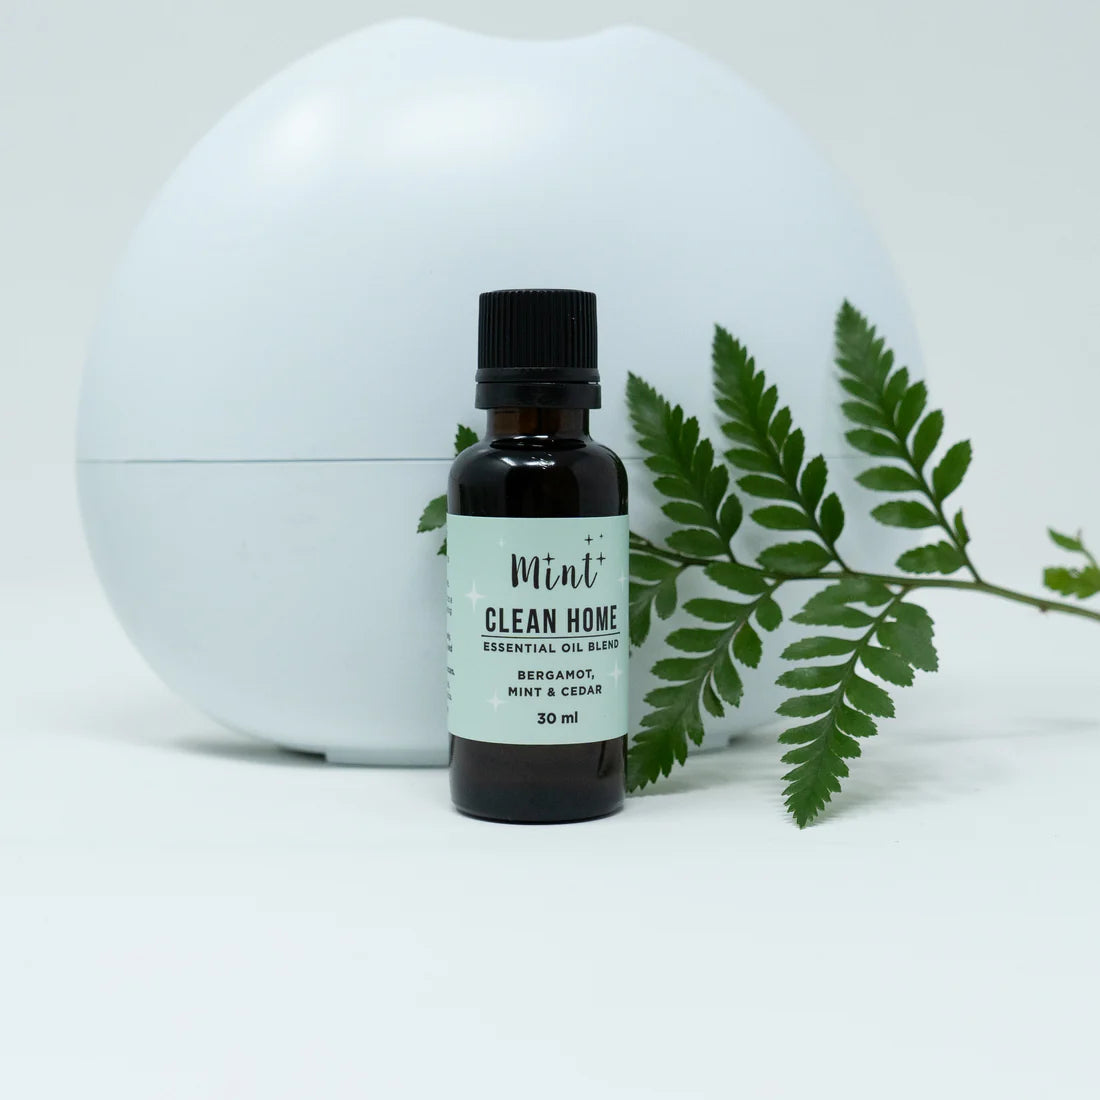 Mint Cleaning Clean Home - Essential Oil Blend